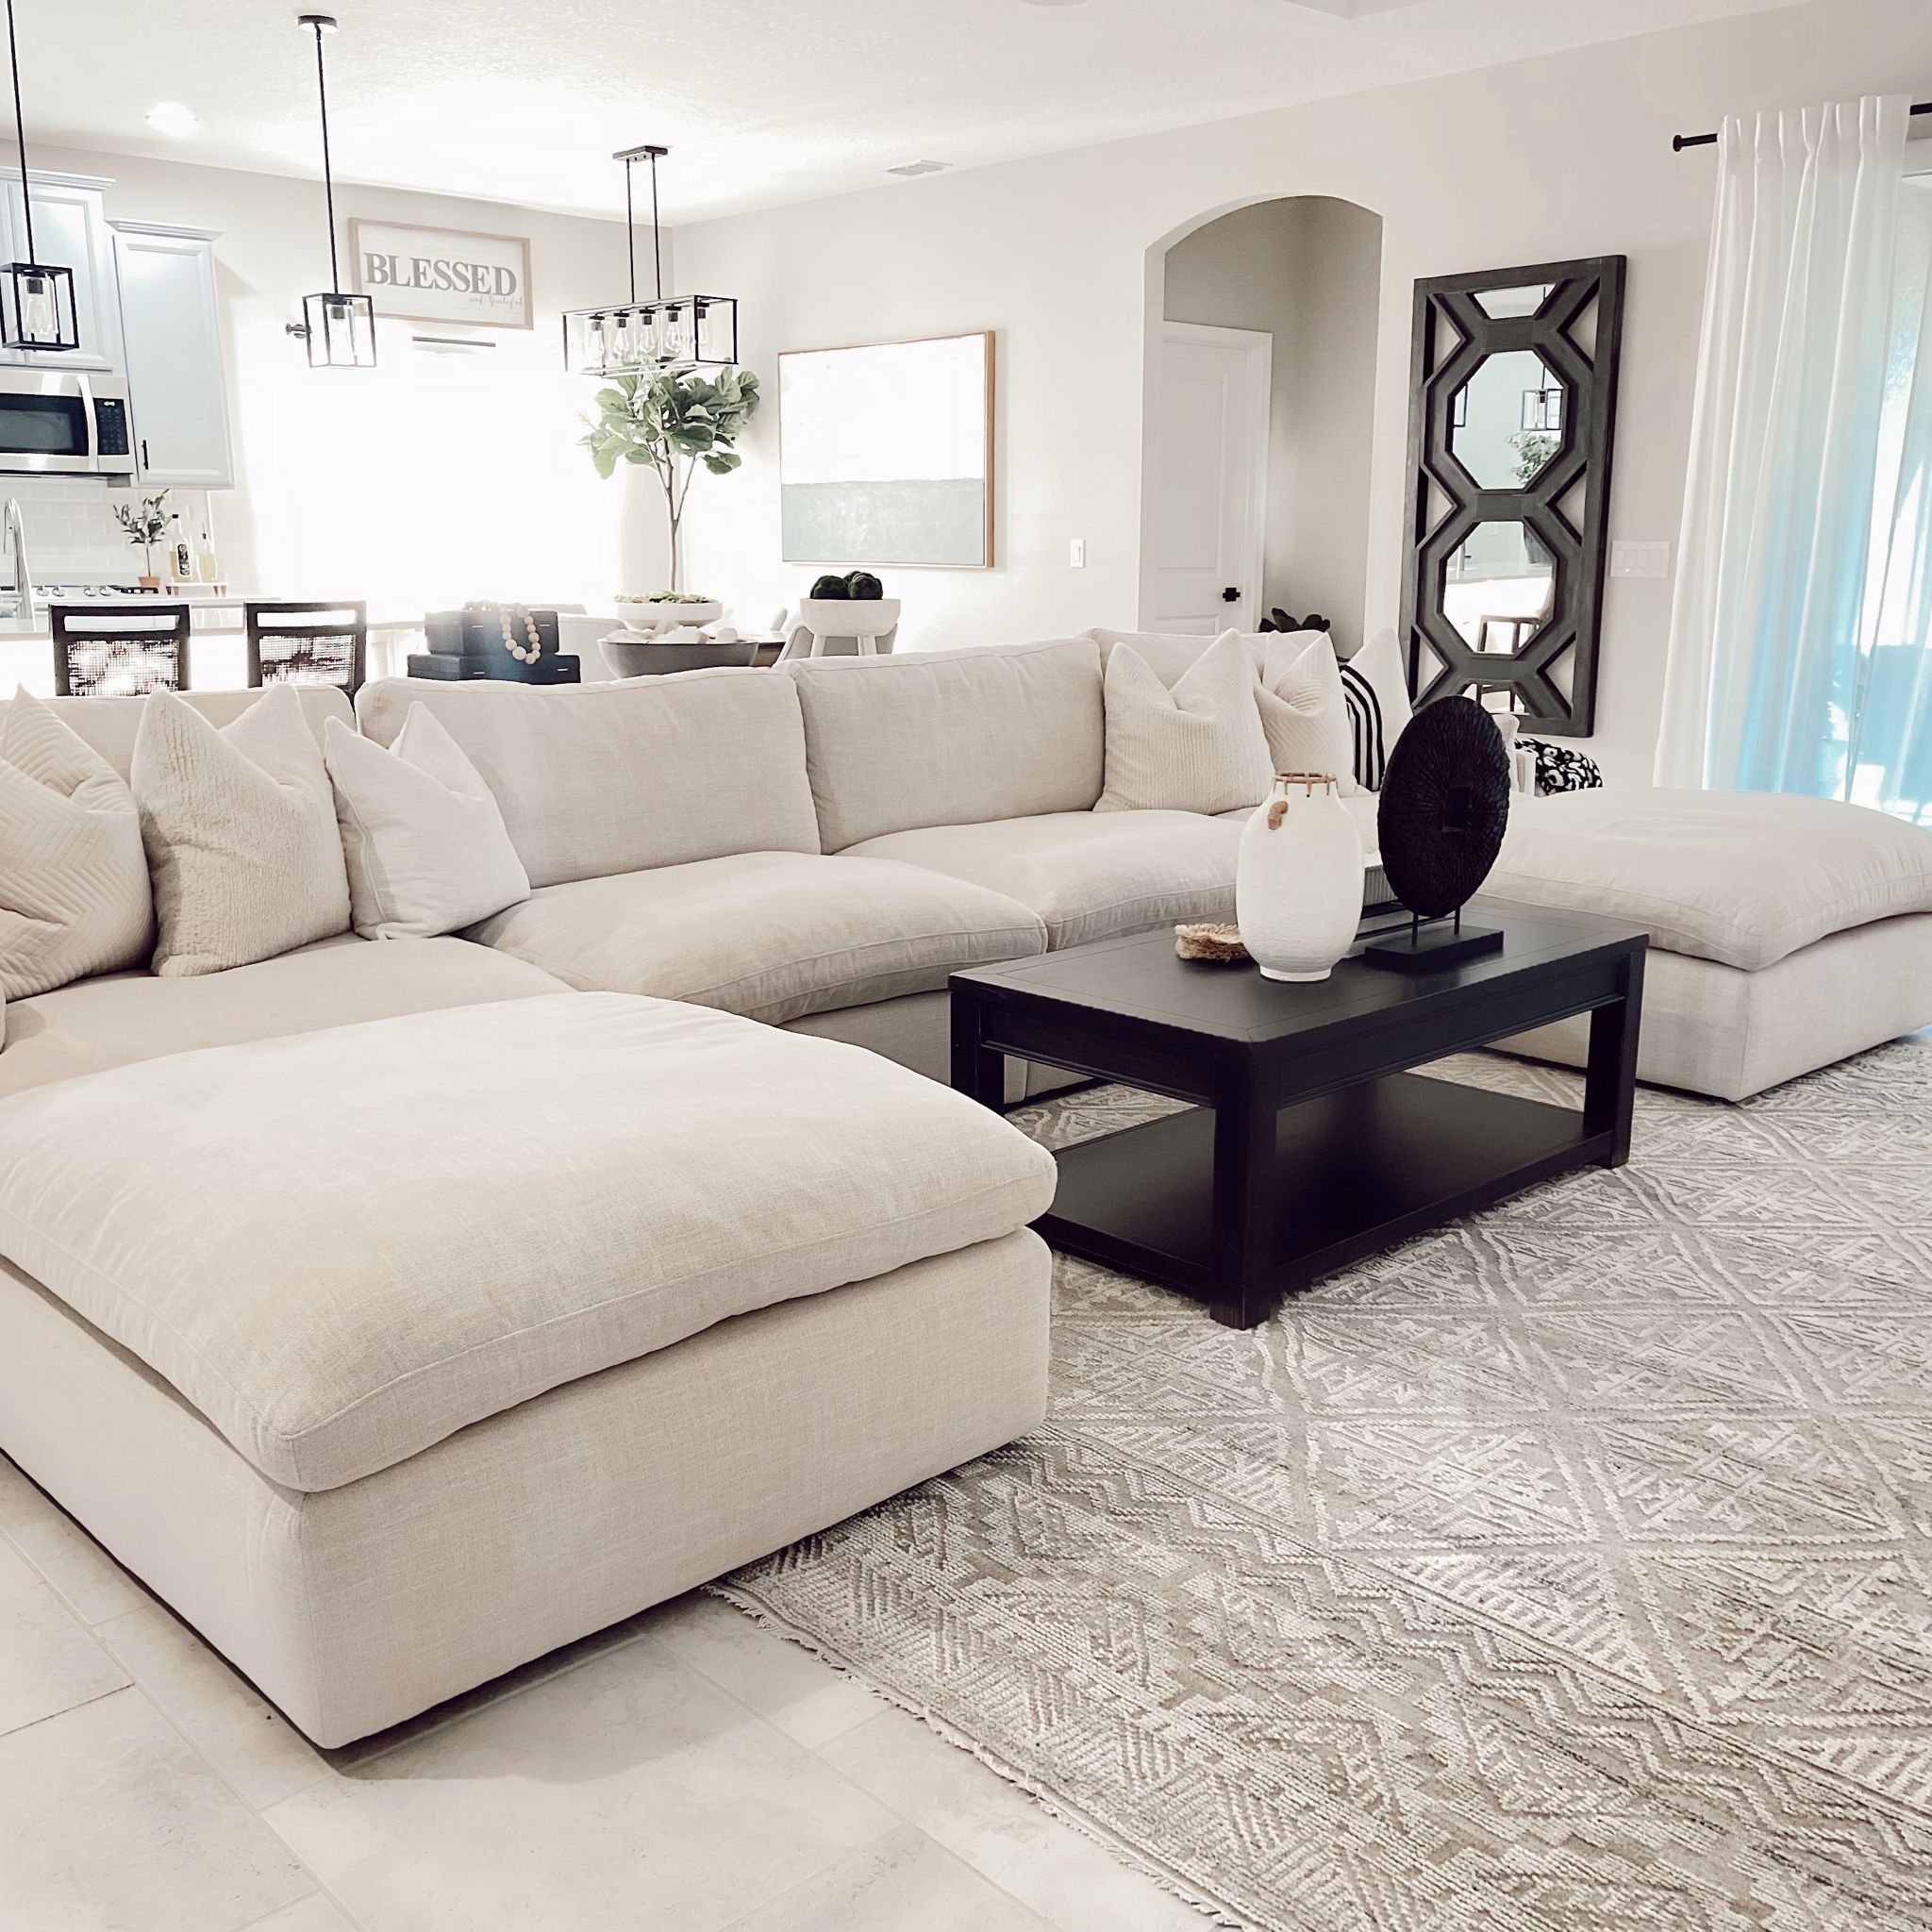 The Ultimate Guide to Choosing a Luxury
Sectional Sofa